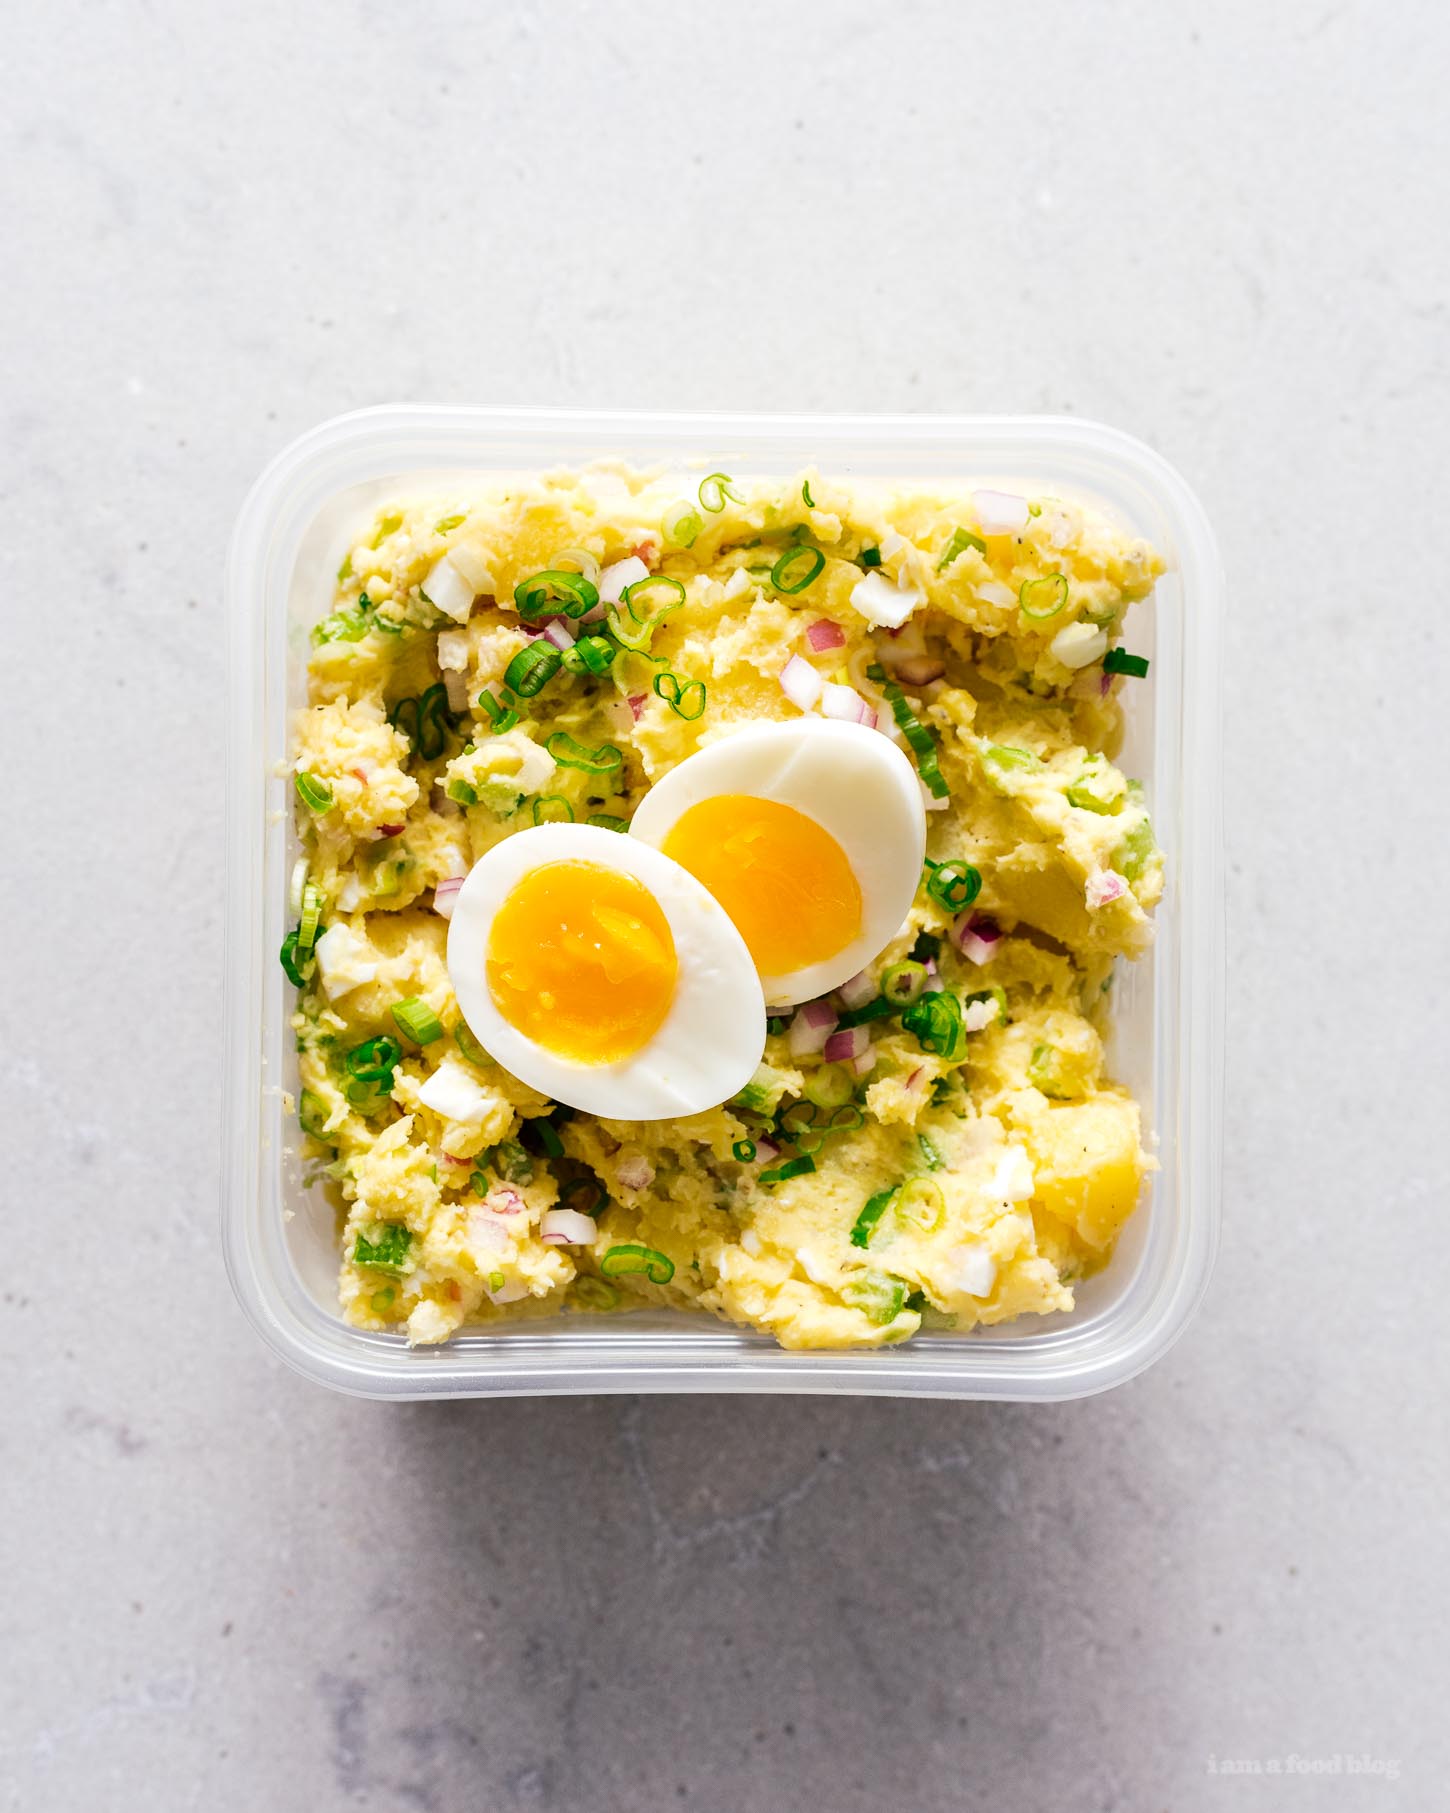 Make this classic perfect picnic potato salad and bring it to ever summer gathering! Creamy potatoes, crunchy celery, onions, and eggs combine into a salad you’ll be making and eating over and over again thanks to a secret ingredient: rice vinegar for tang. #potatosalad #potatoes #recipes #potatosaladrecipe